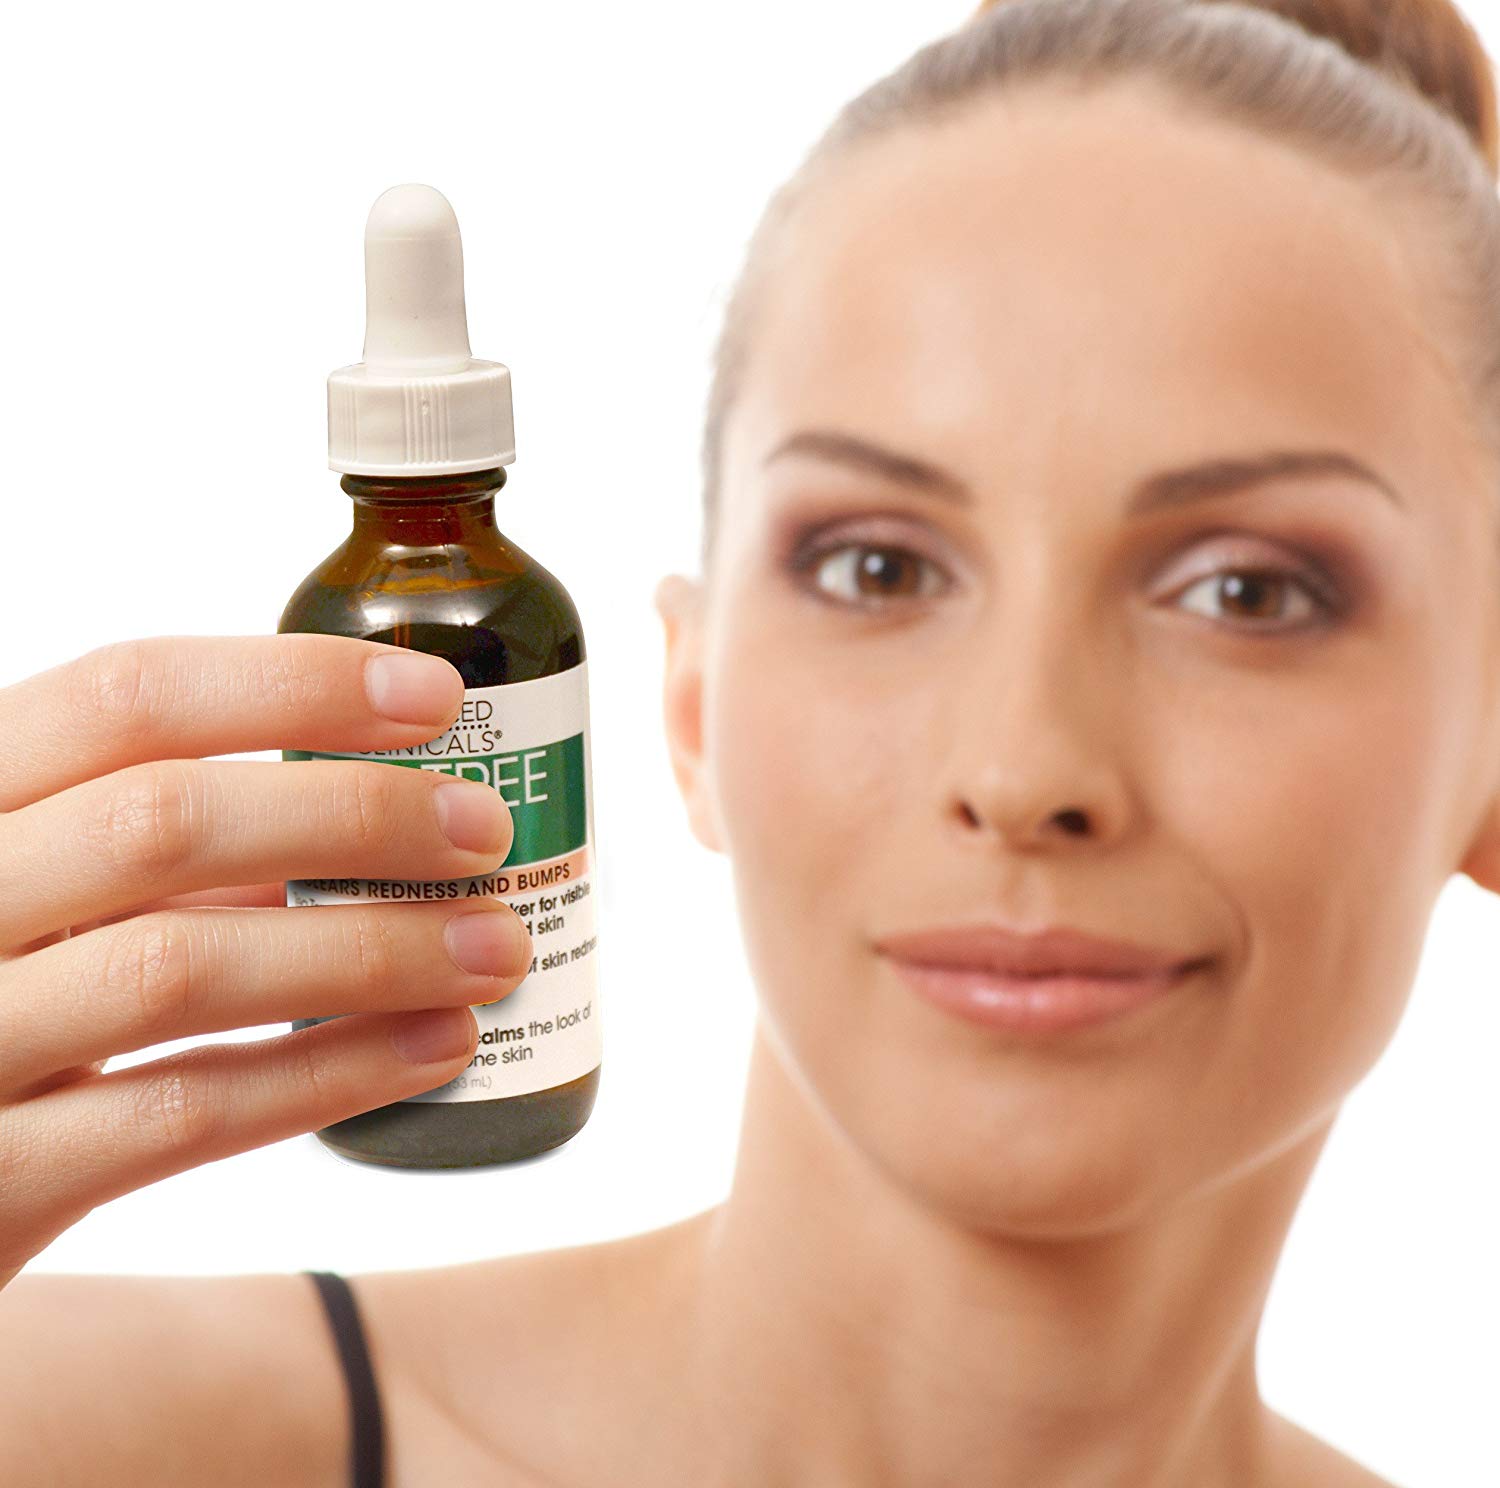 one of the best facial oil products - Advanced Clinicals Tea Tree Oil for Redness and Bumps